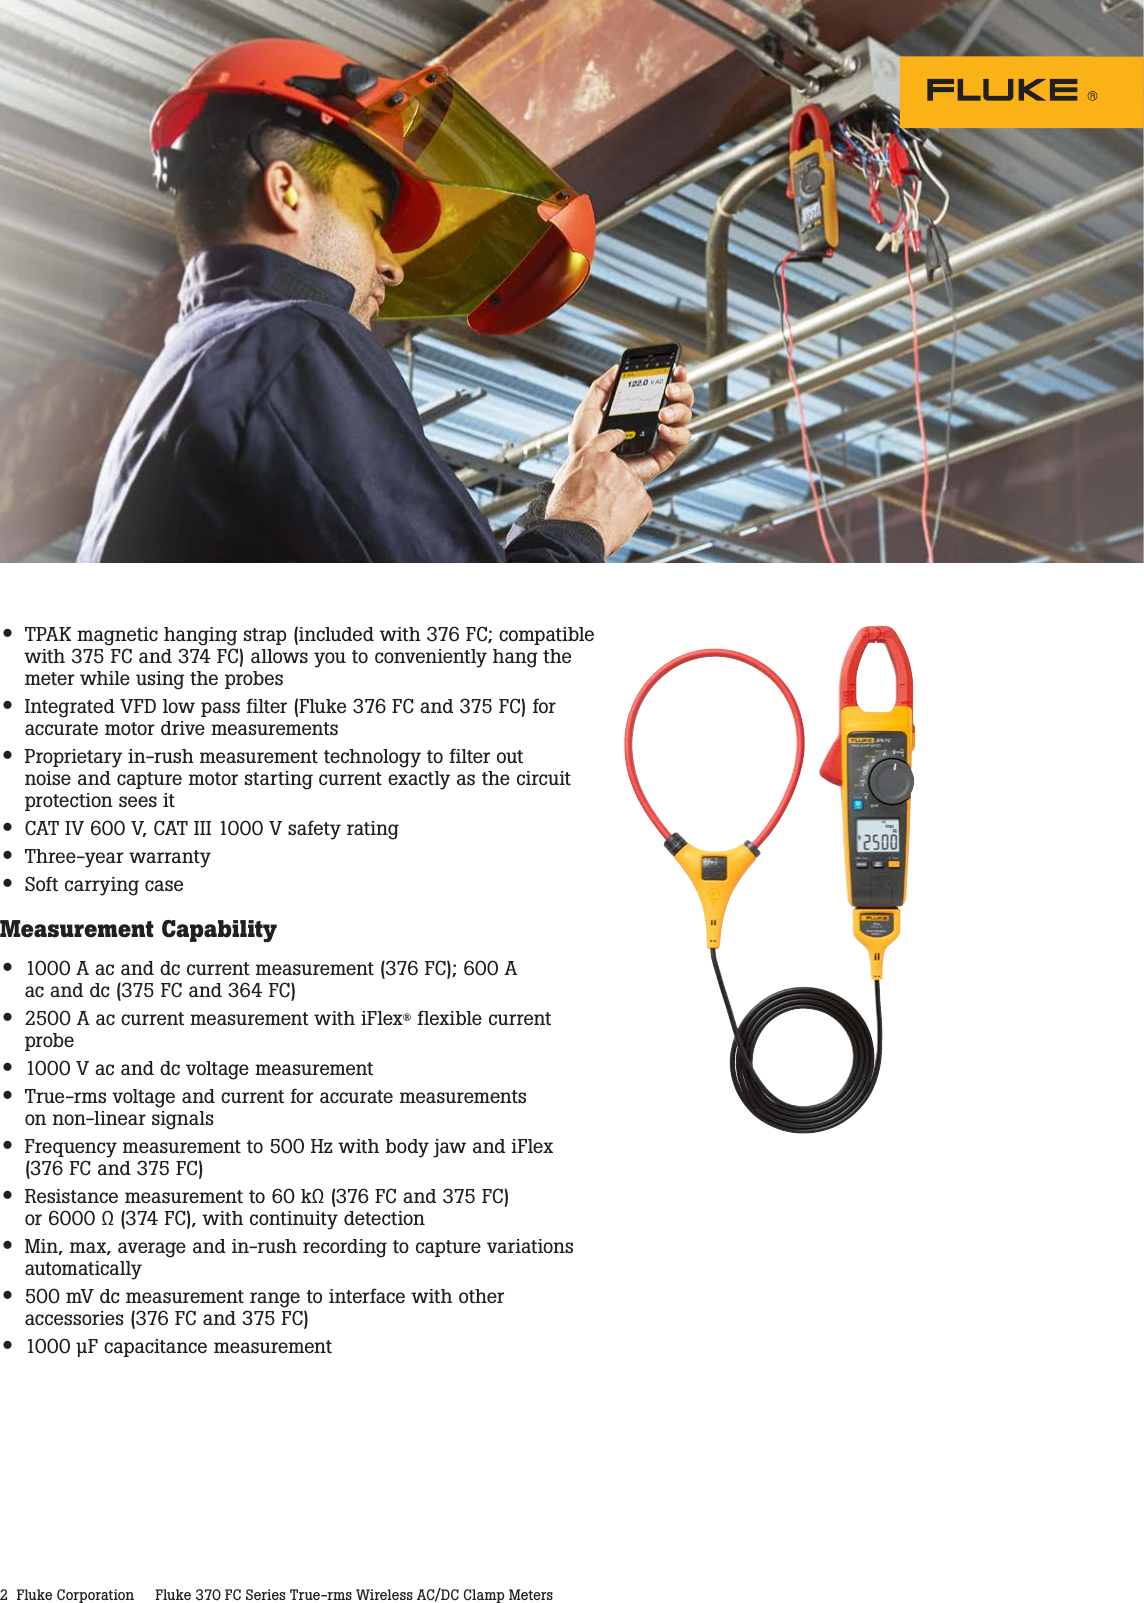 Page 2 of 5 - Fluke 370 FC Series True-rms Wireless AC/DC Clamp Meters